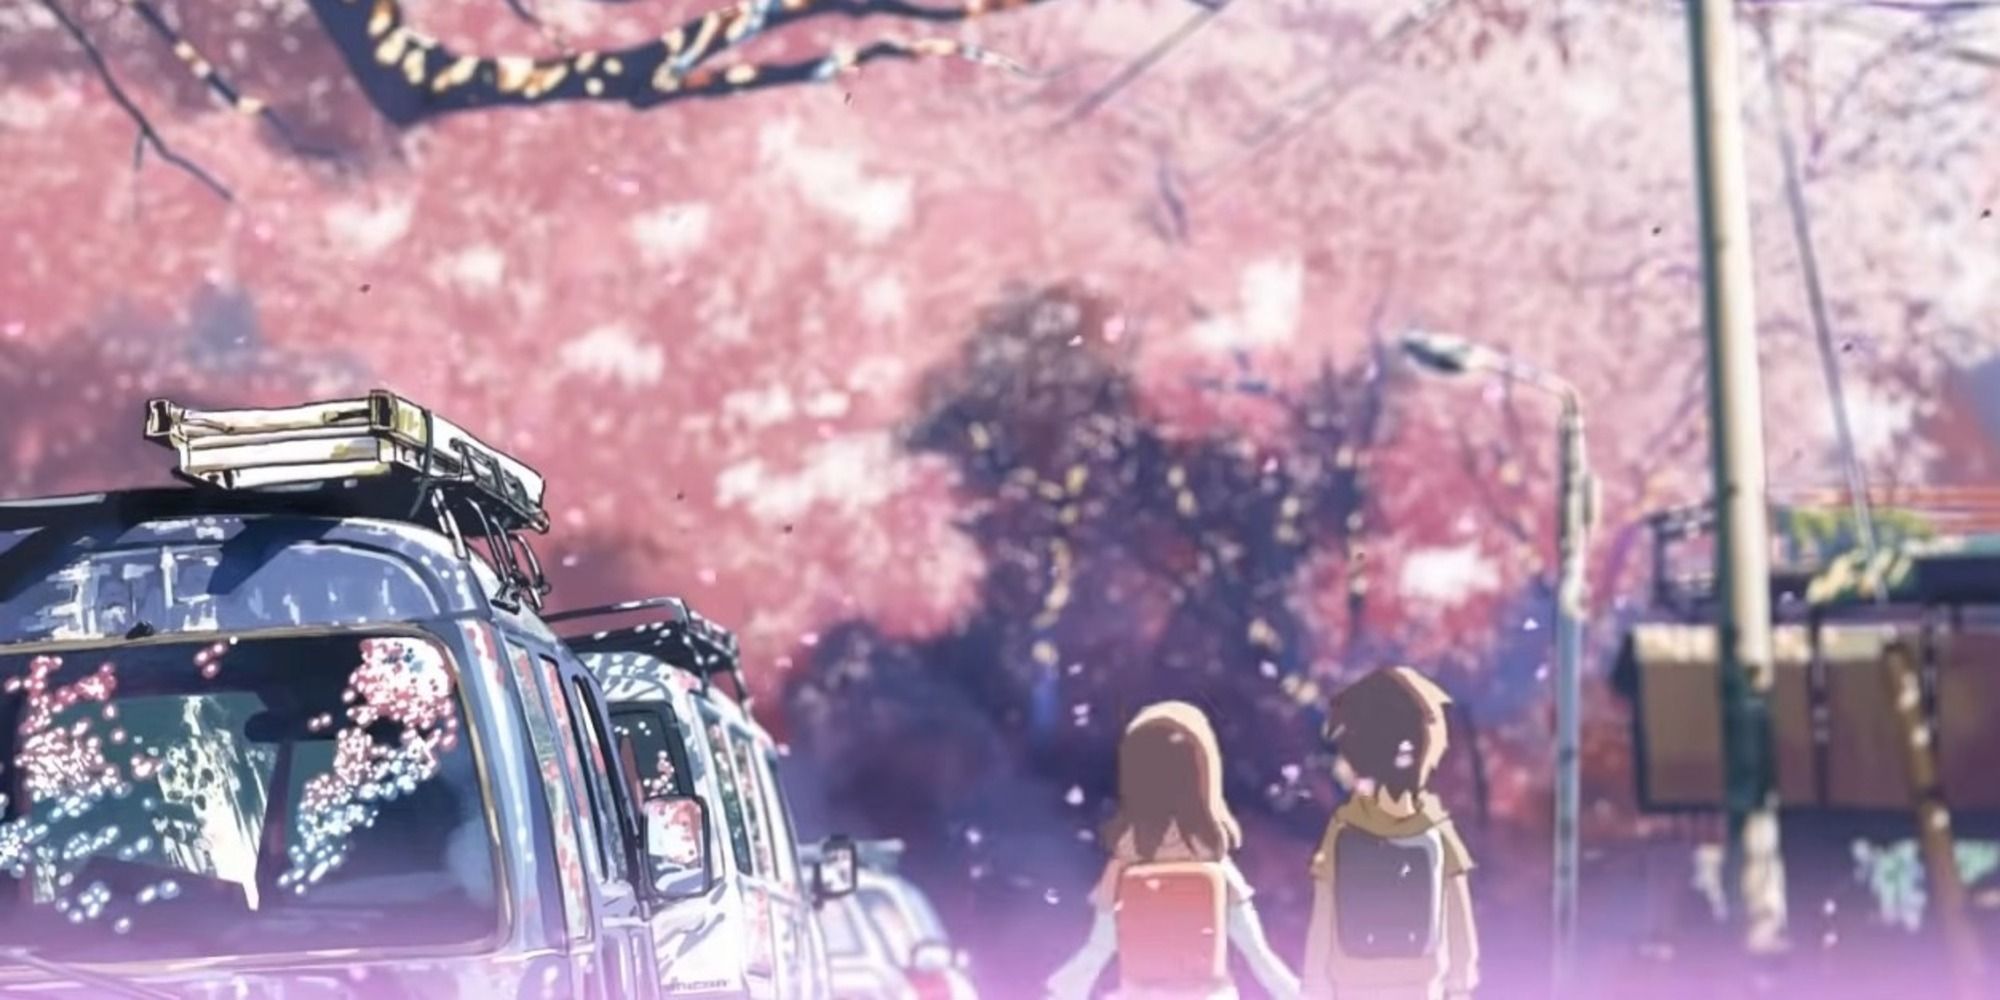 5 Centimeters Per Second is one of the best movies like Your Name